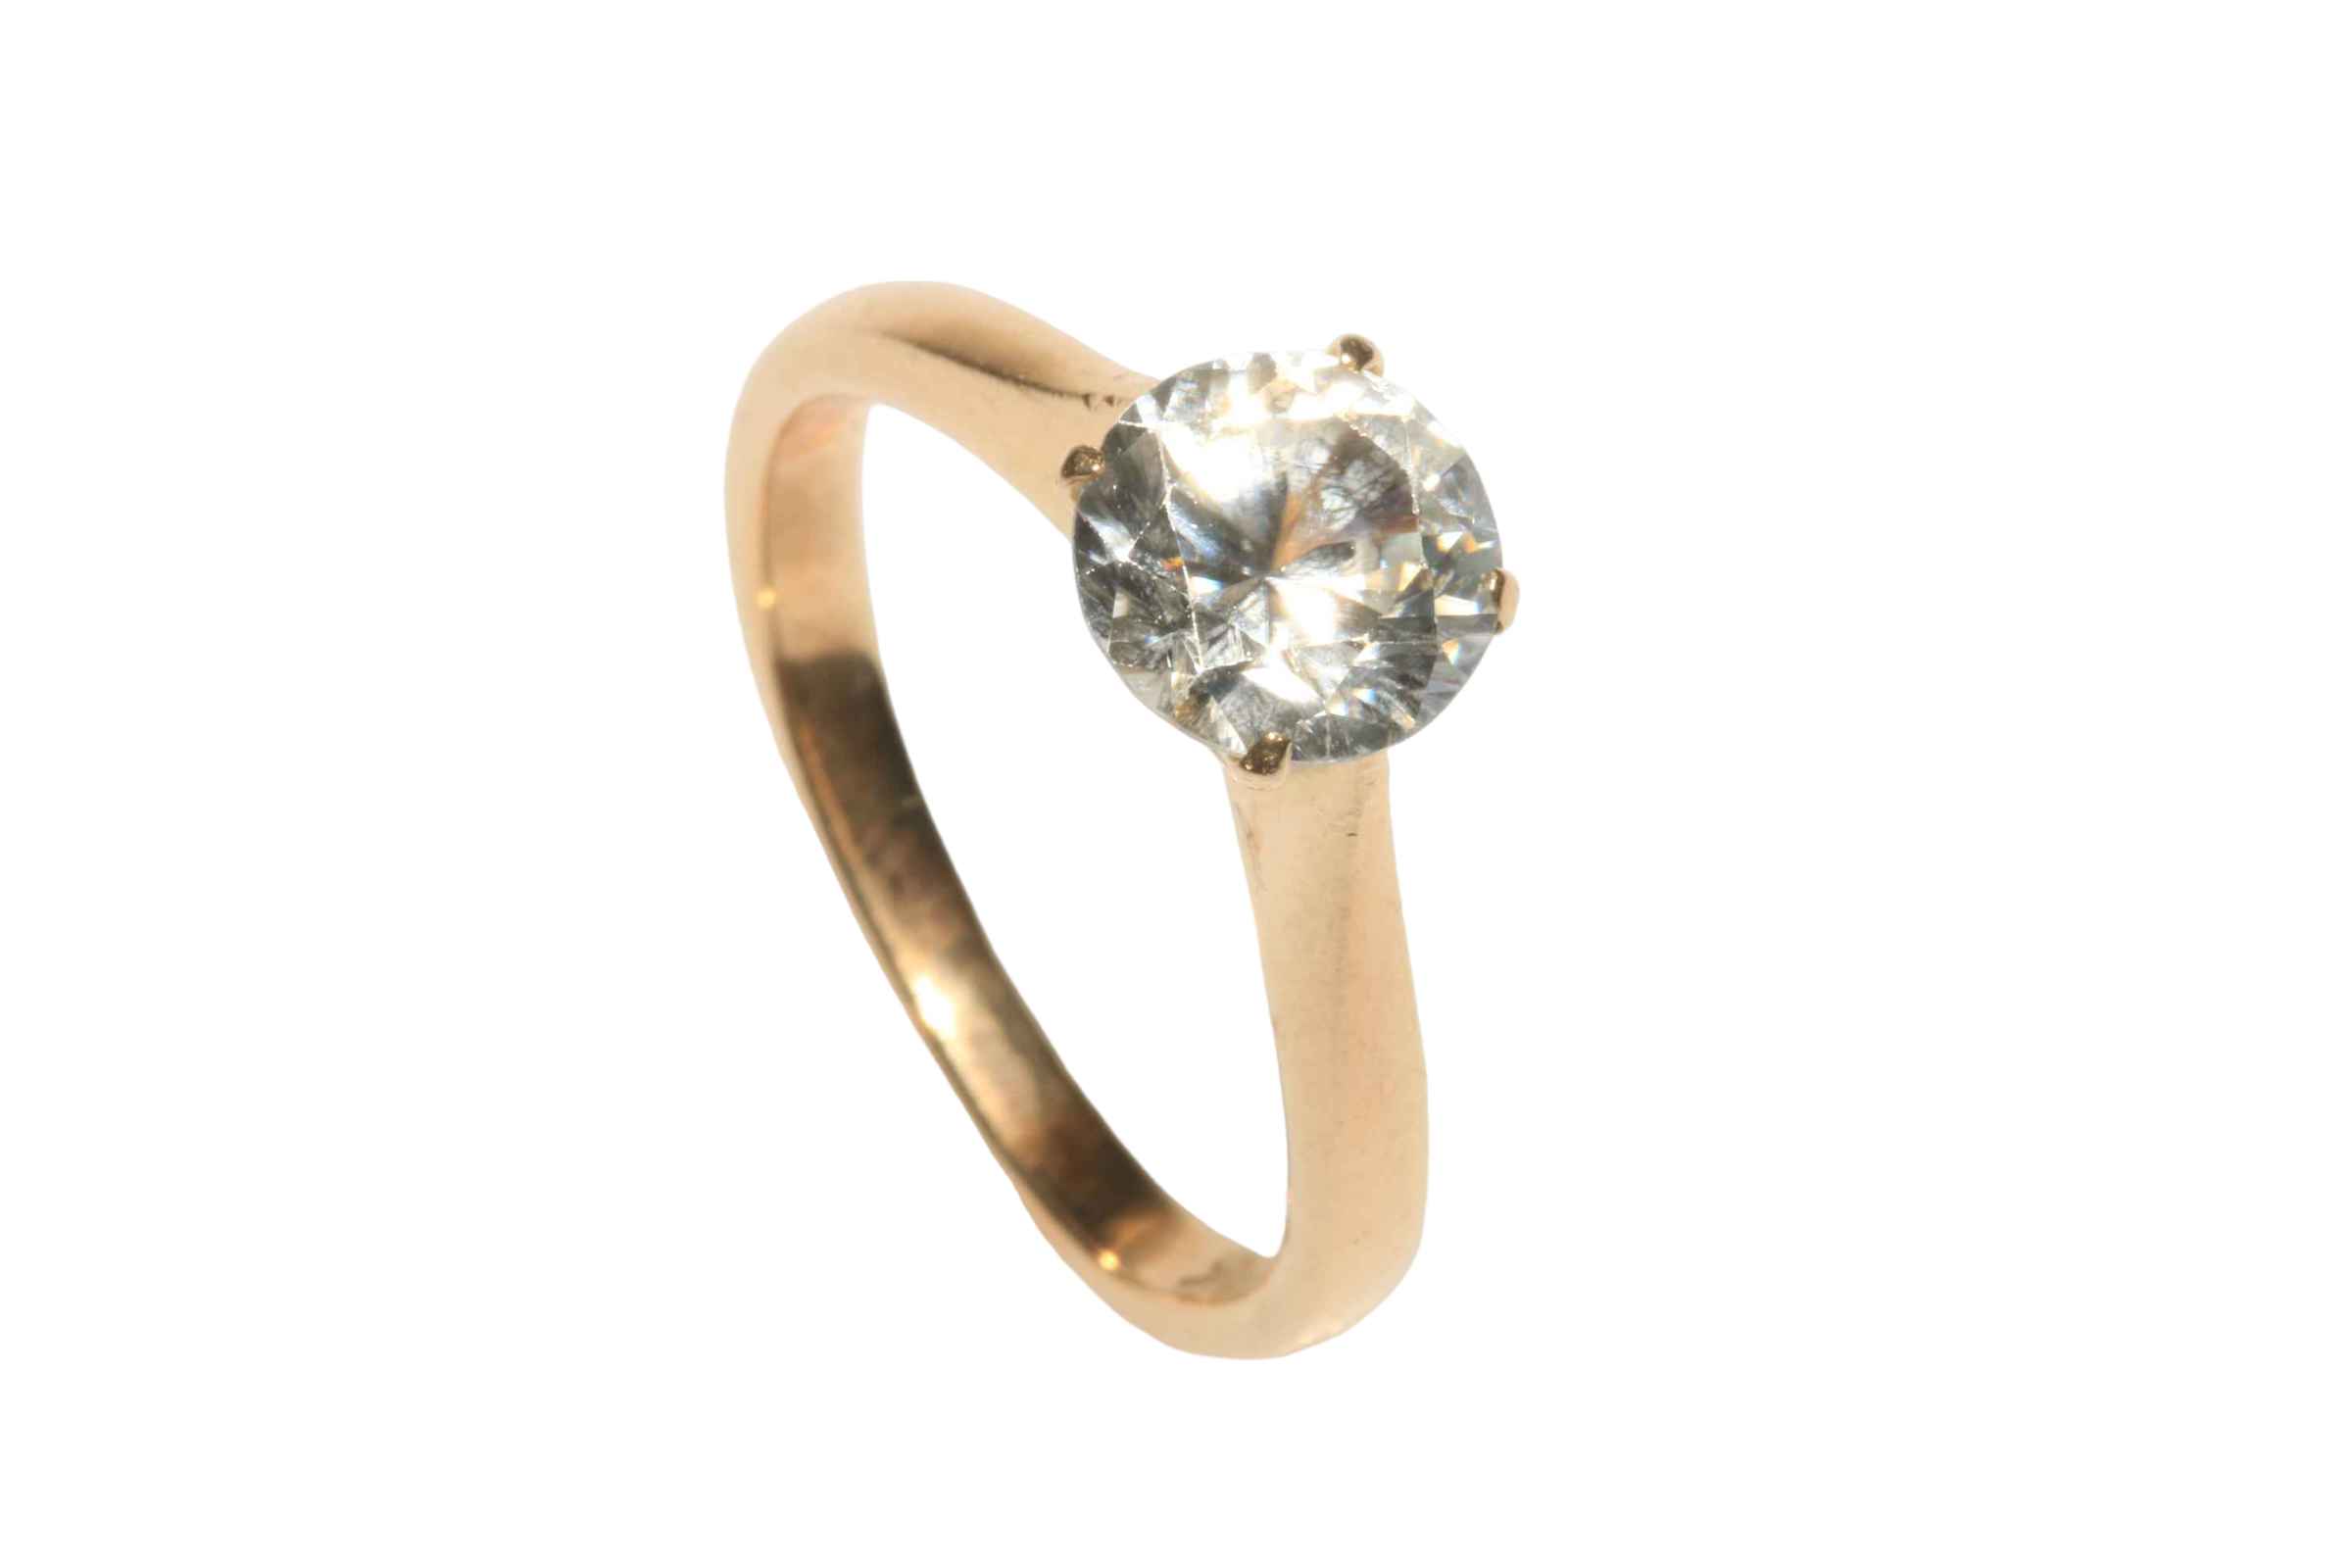 WITHDRAWN Diamond solitaire 18k gold ring, the approximate 1 carat diamond in V shape setting,